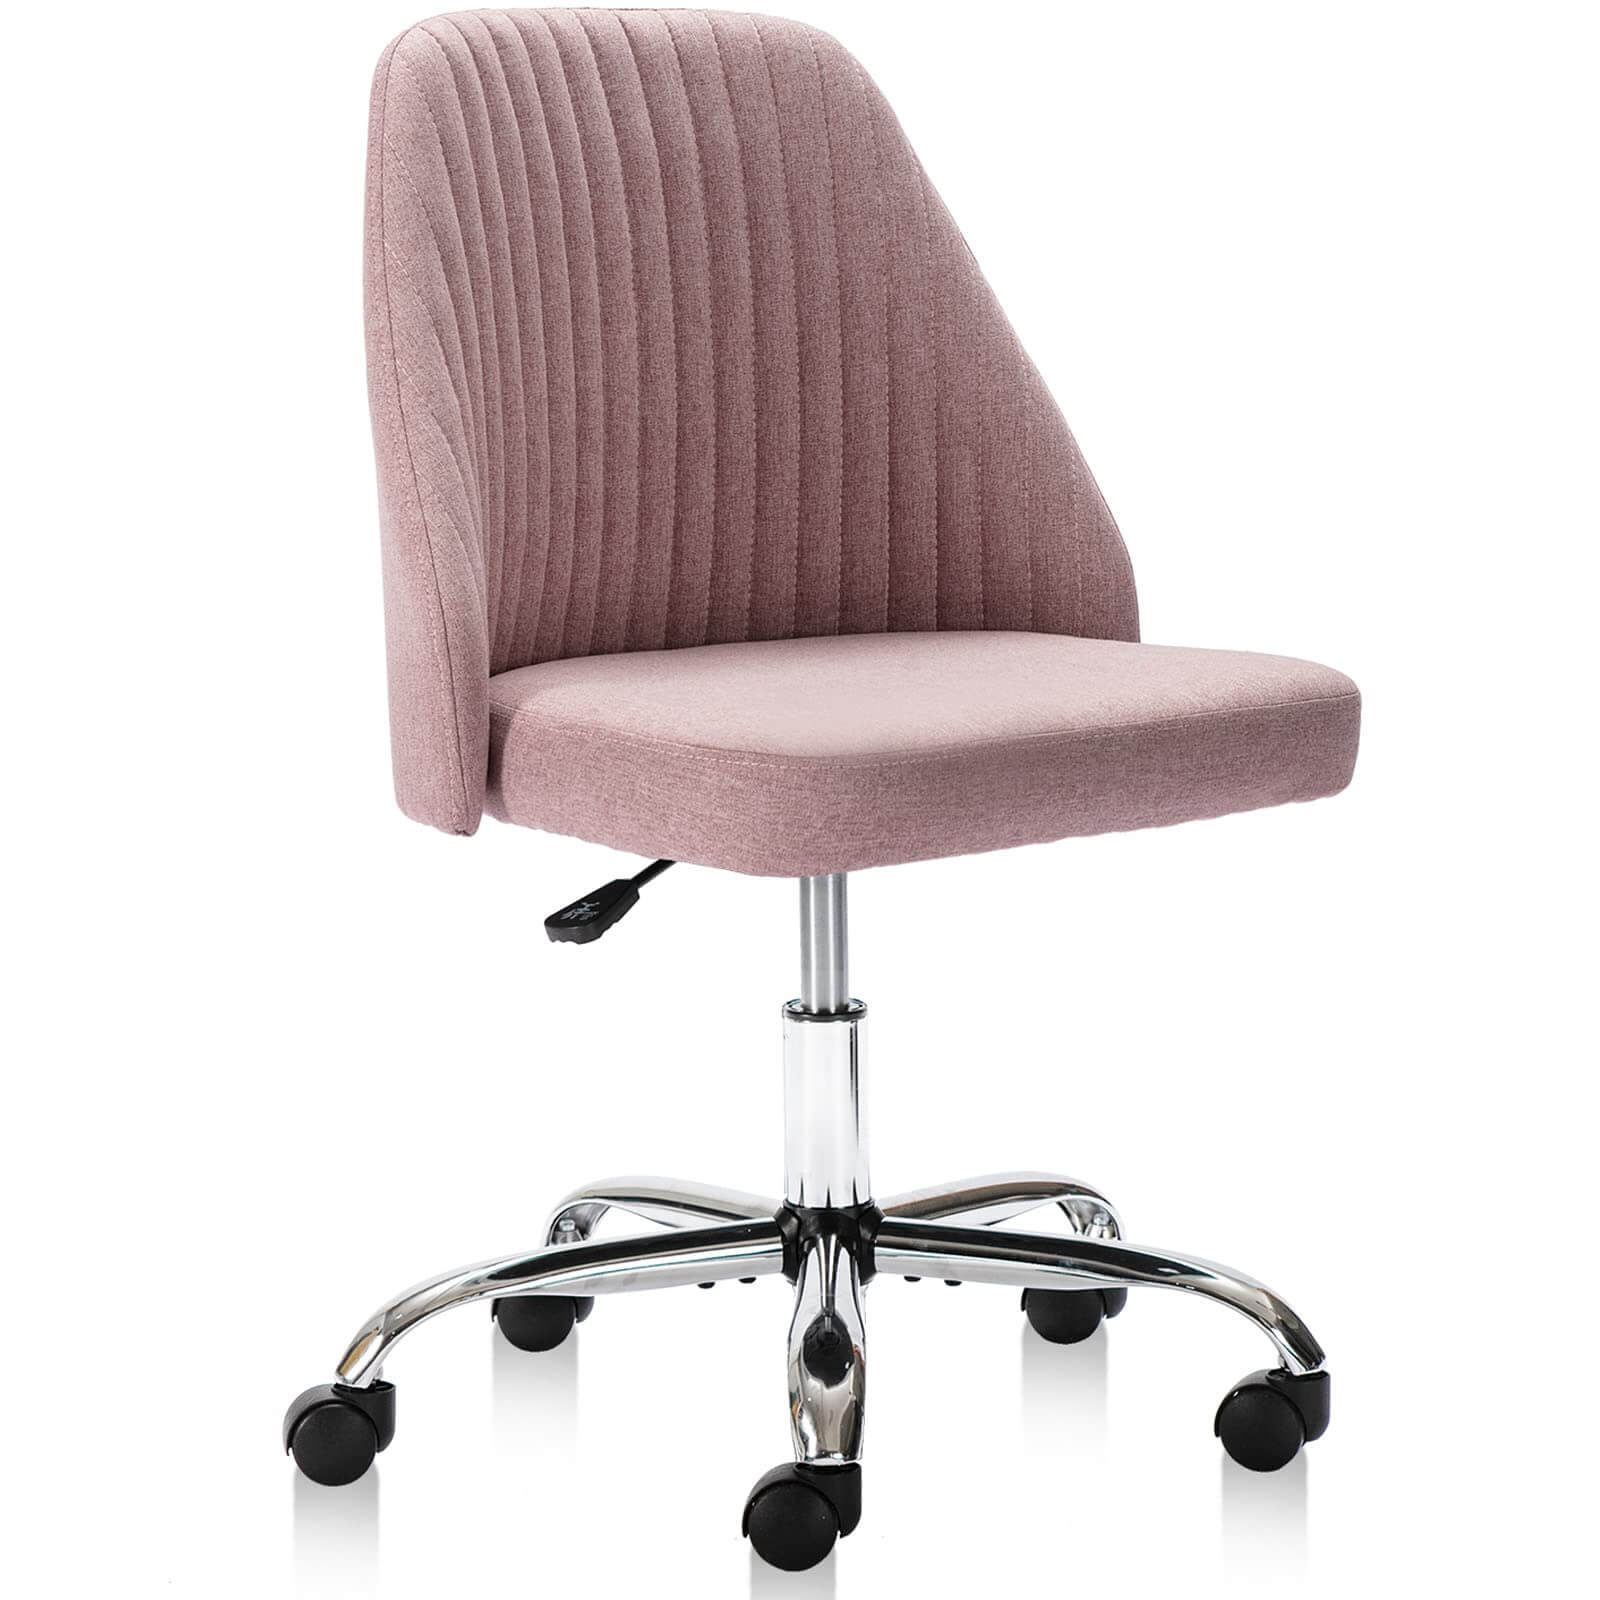 Mukava Armless Office Chair Desk Chair No Wheels, Fabric Padded